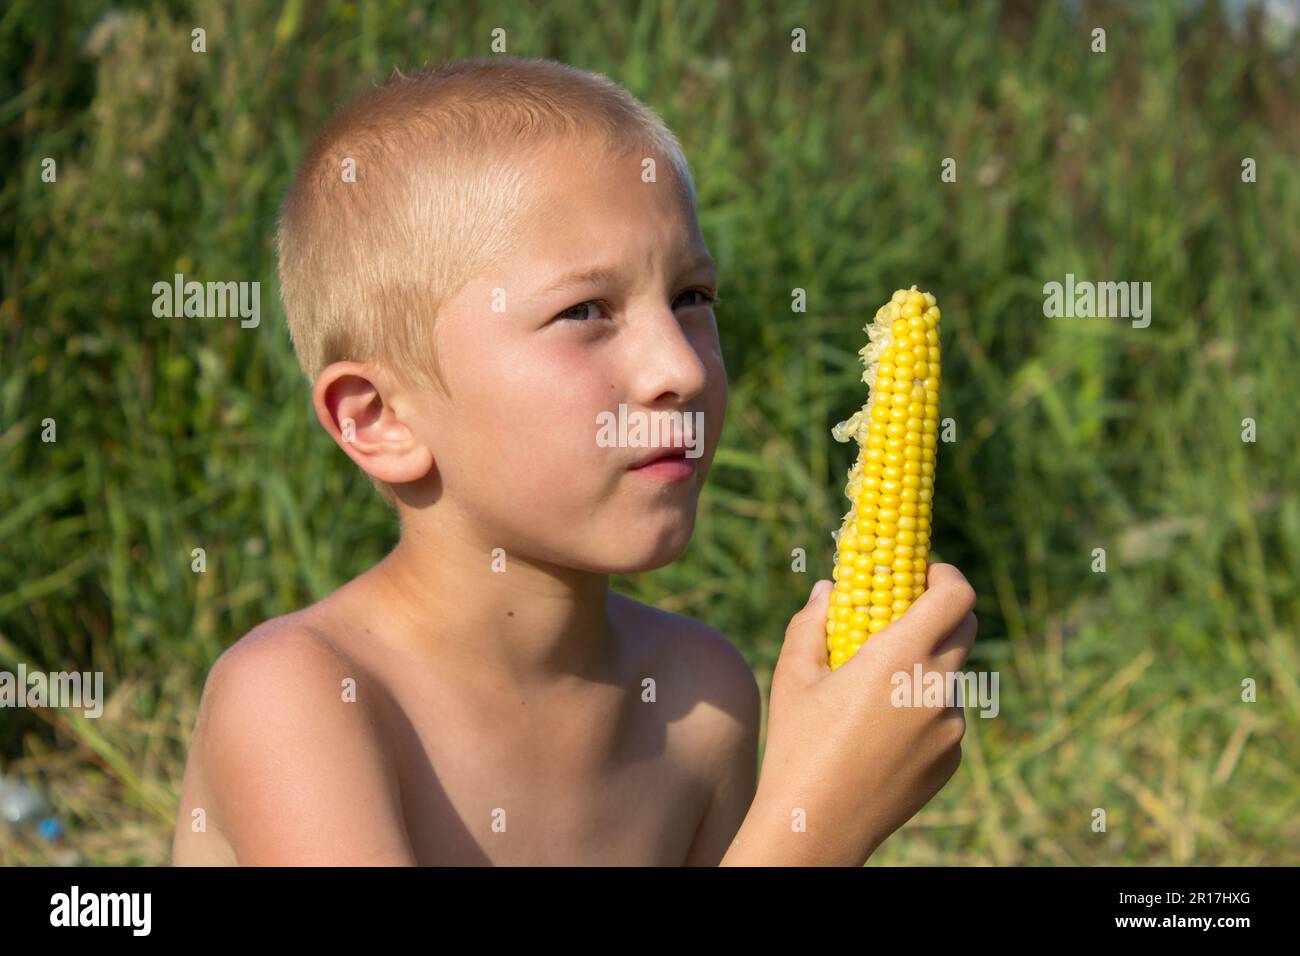 boy eats sweet corn,The boy looks at the sweet corn in his hands to eat Stock Photo